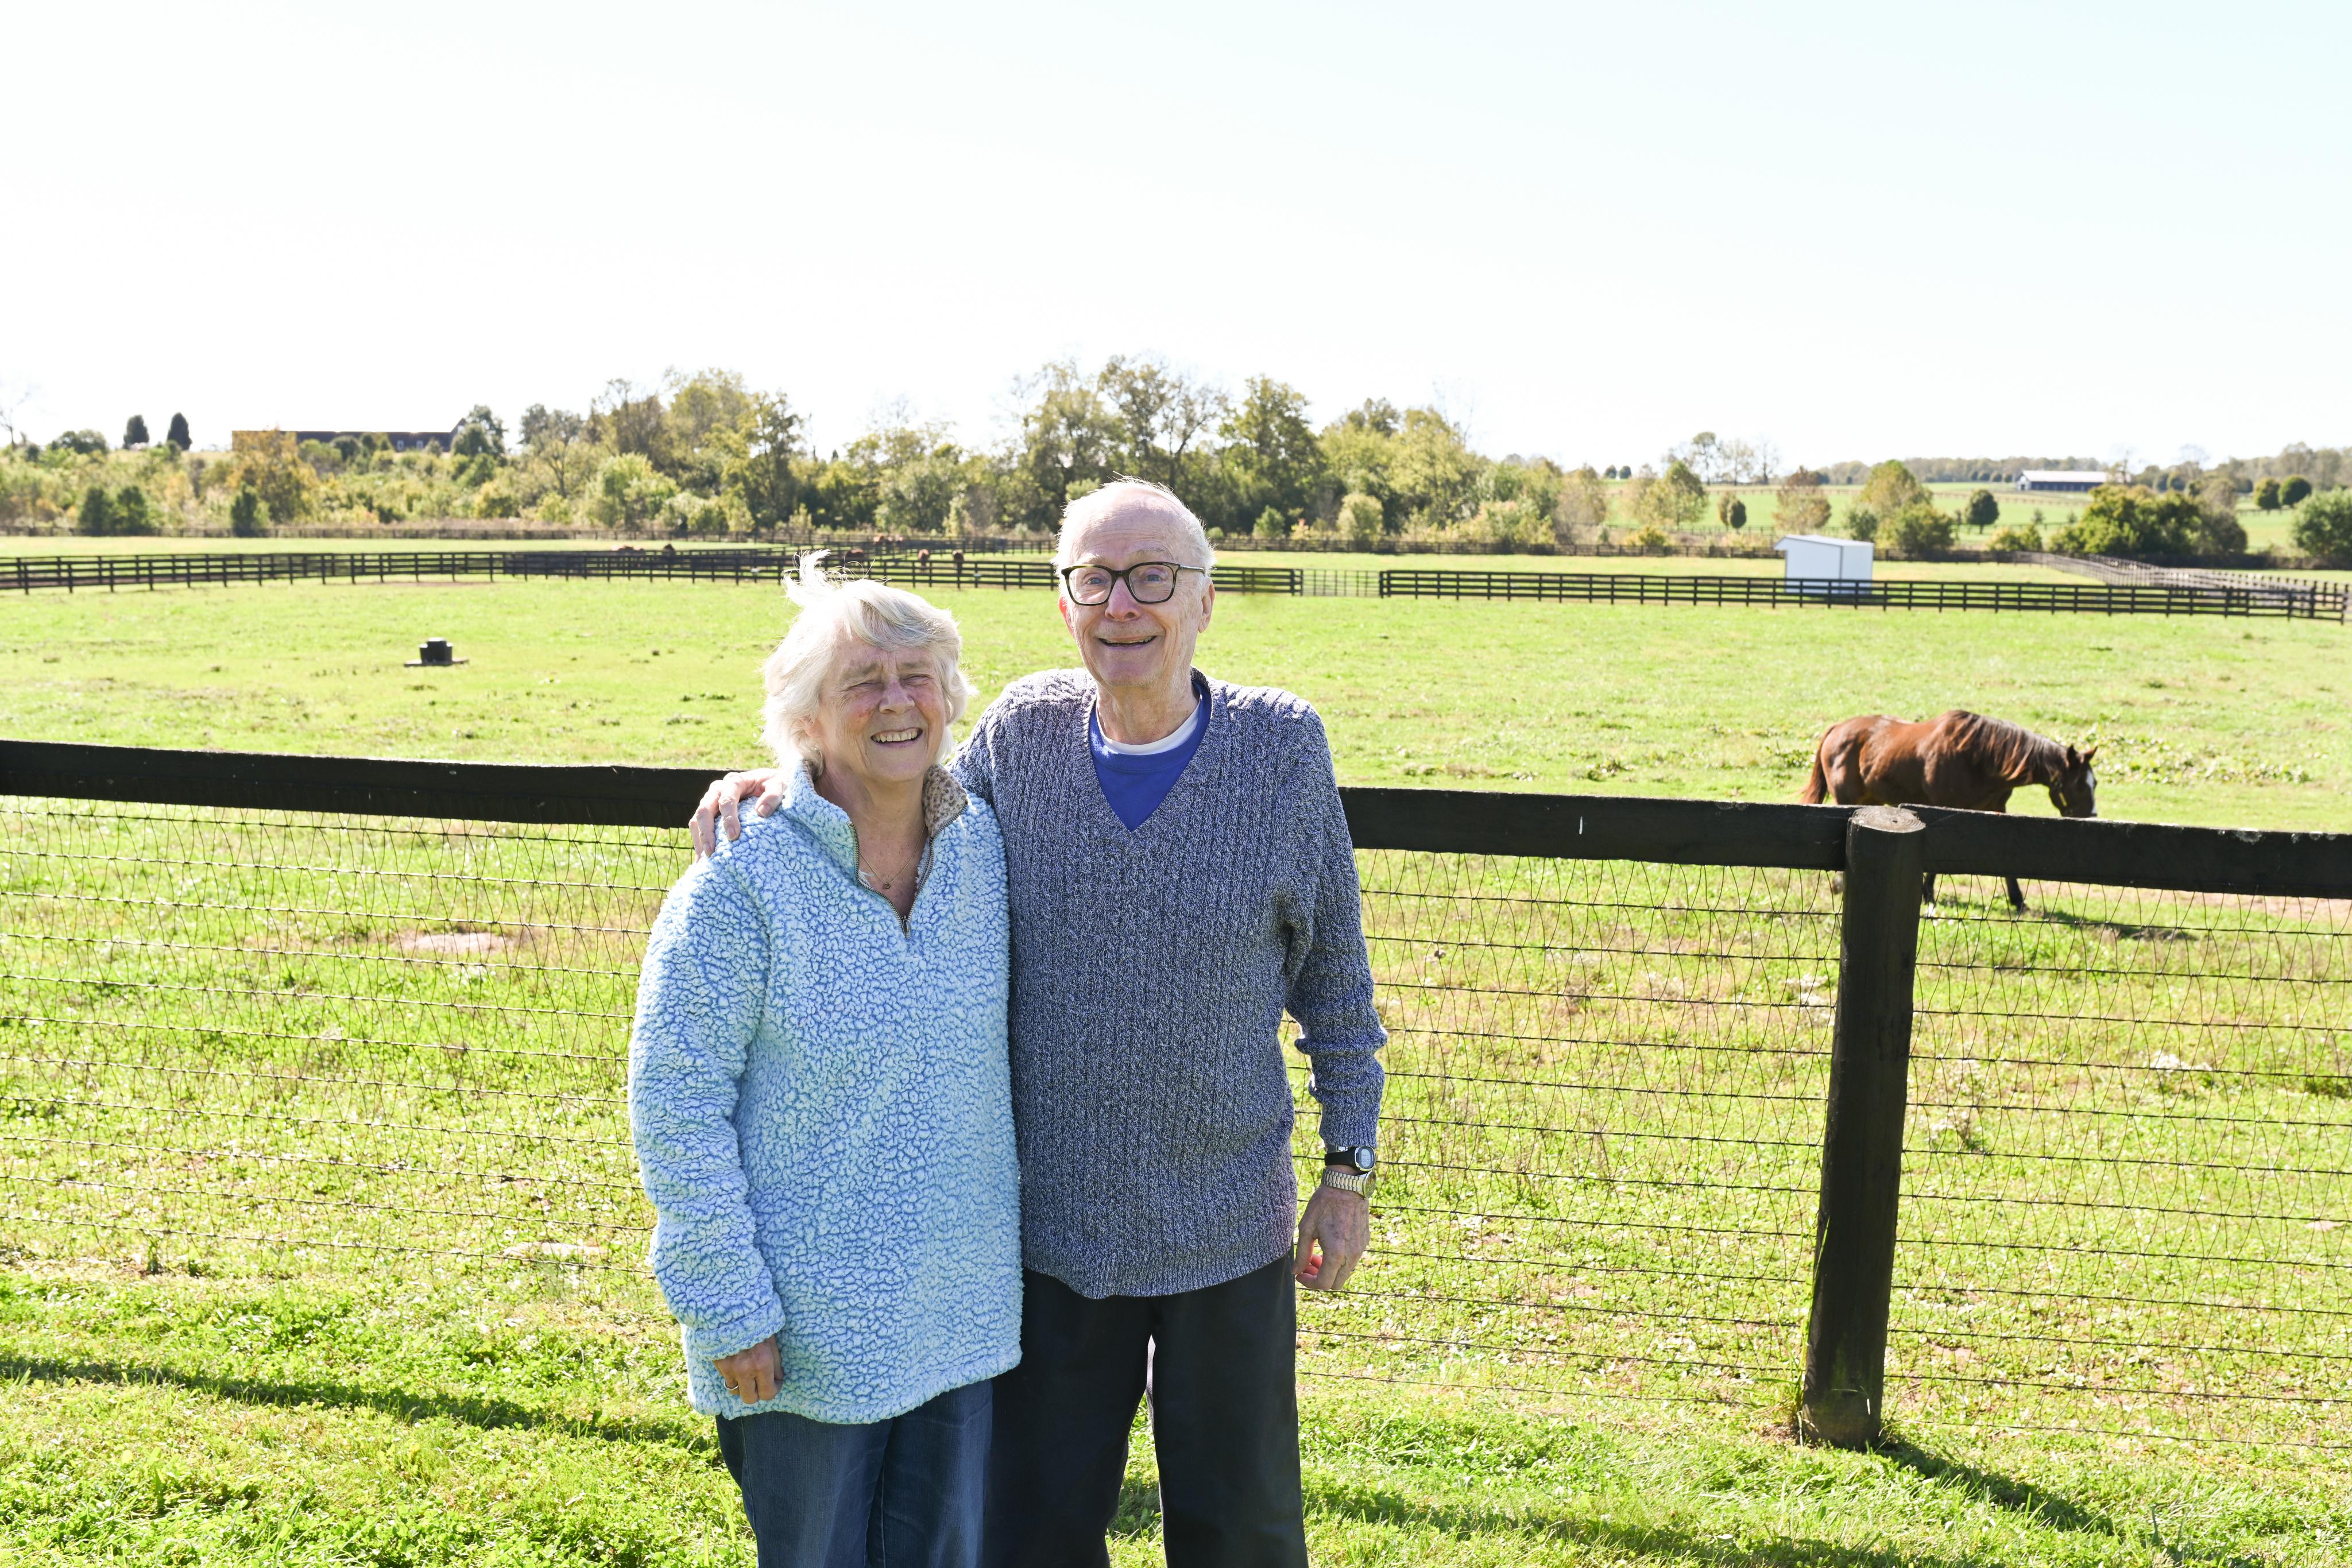 Two smiling people standing by a fence with a pastoral field and horses in the background.